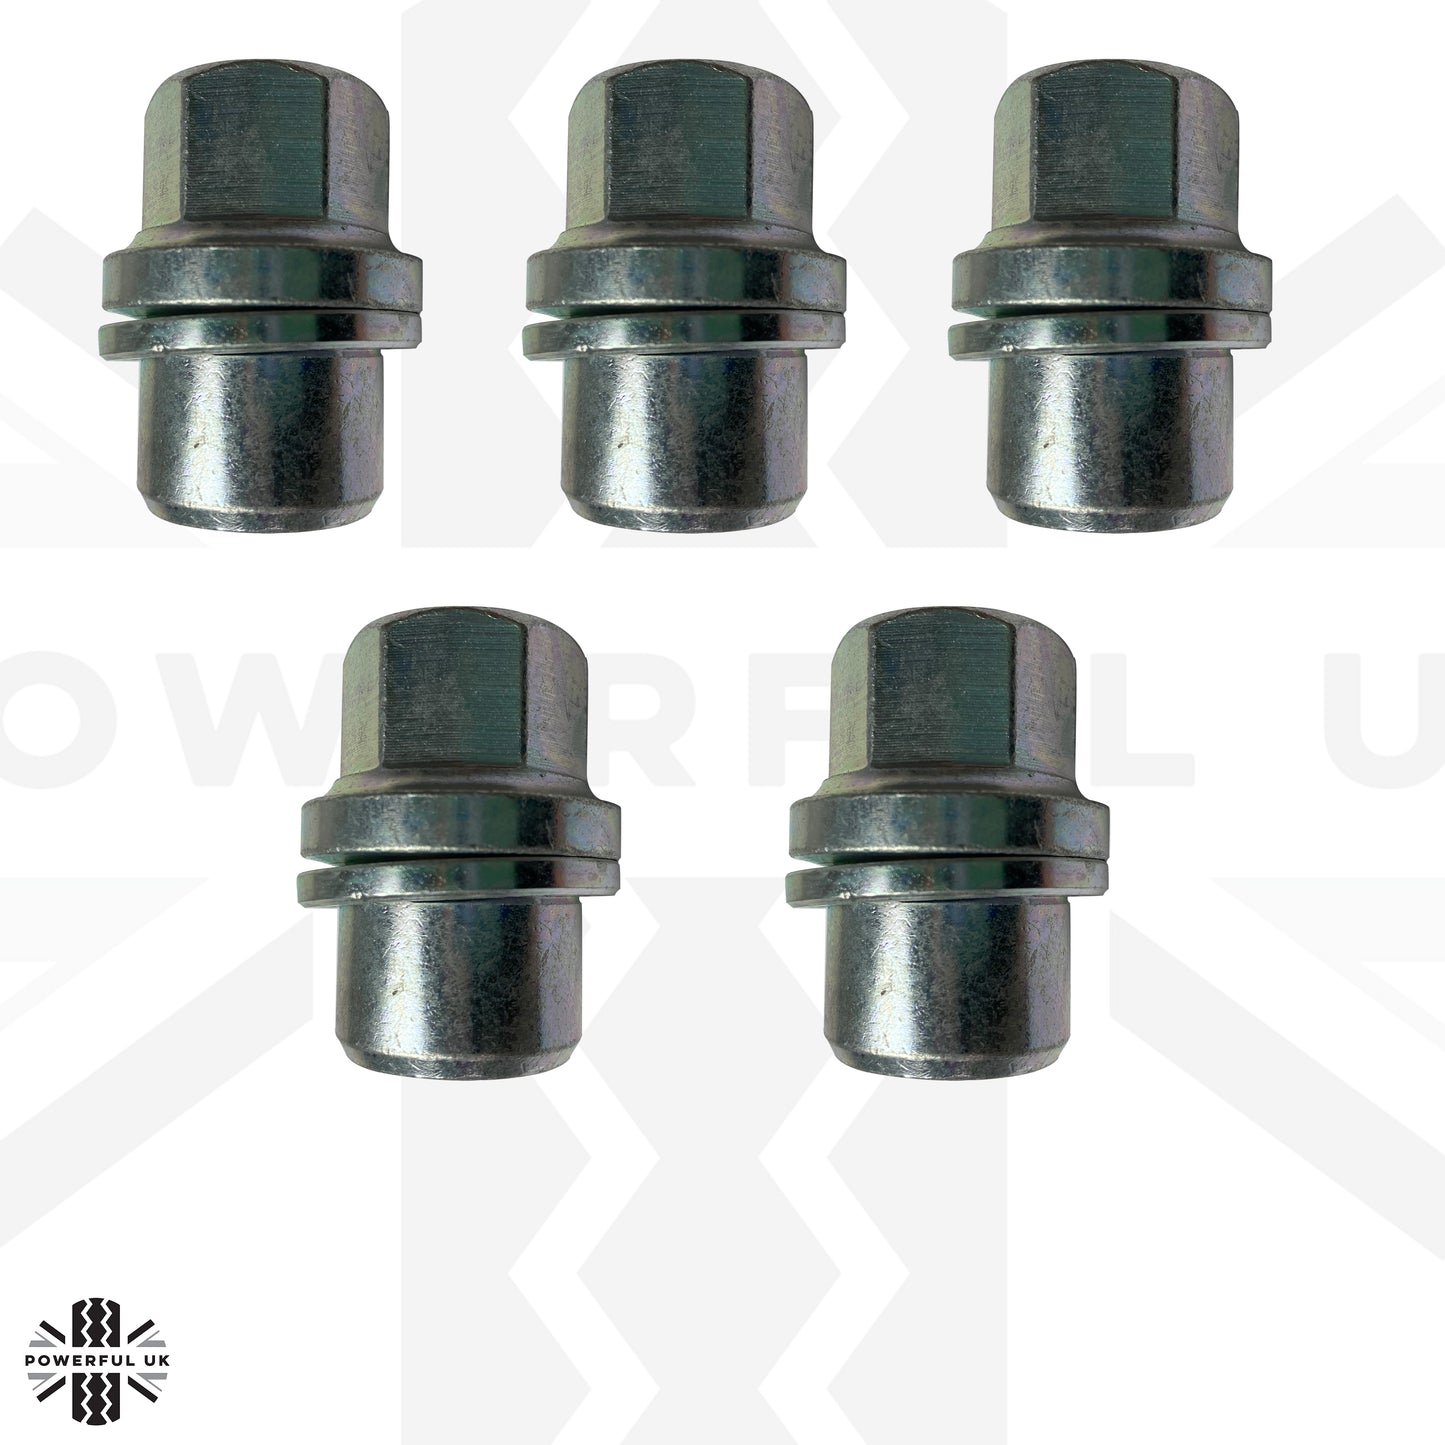 Genuine Alloy Wheel Nuts 5pc kit for Range Rover Classic - Alloy wheel type